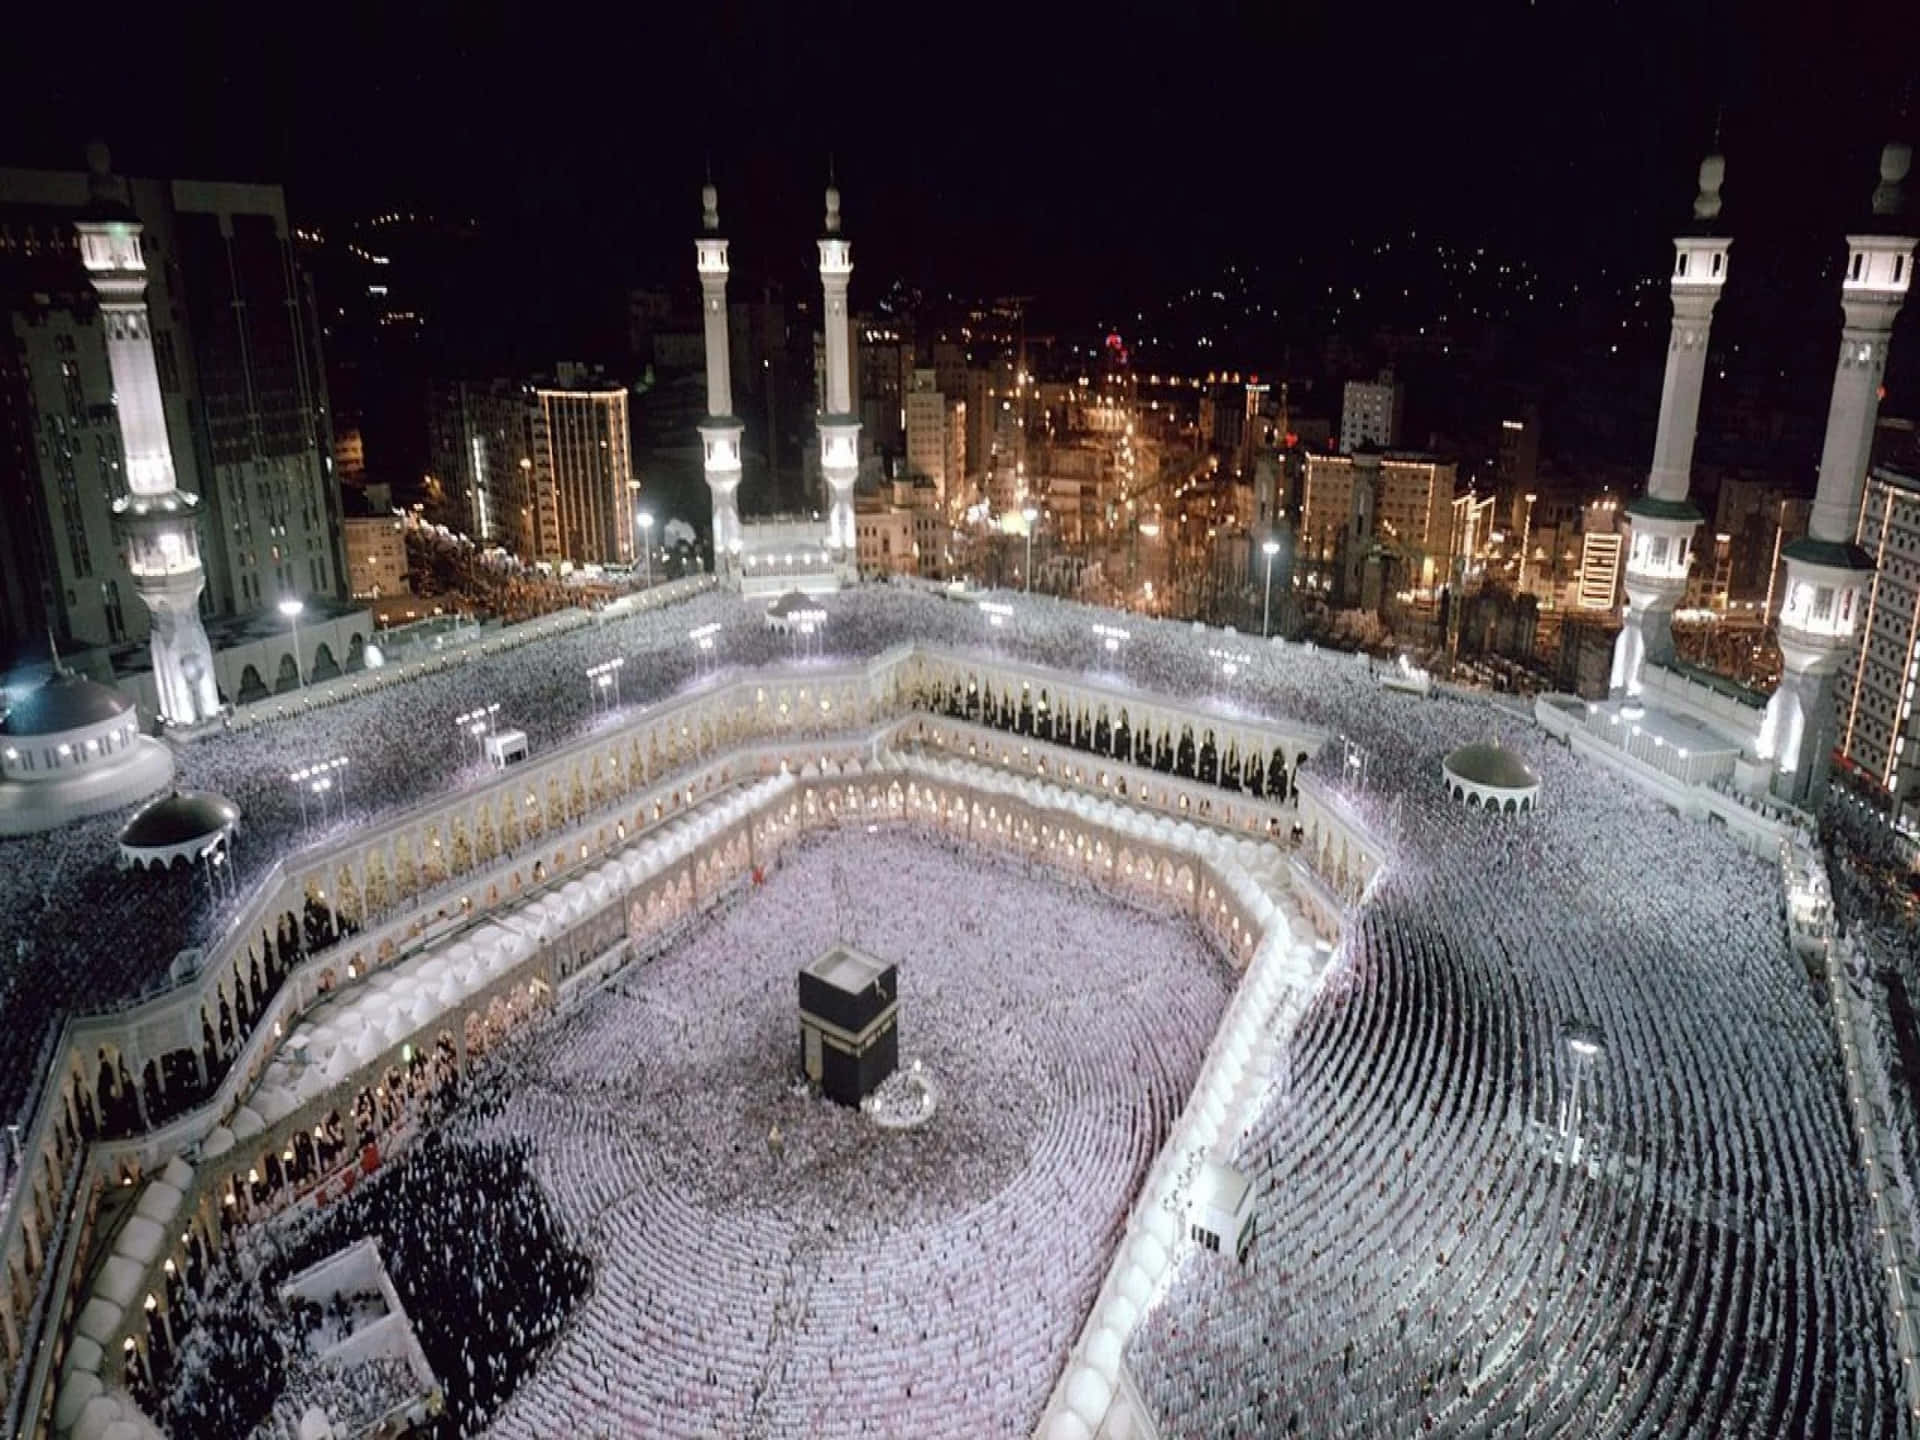 The Kaaba At Night With People Around It